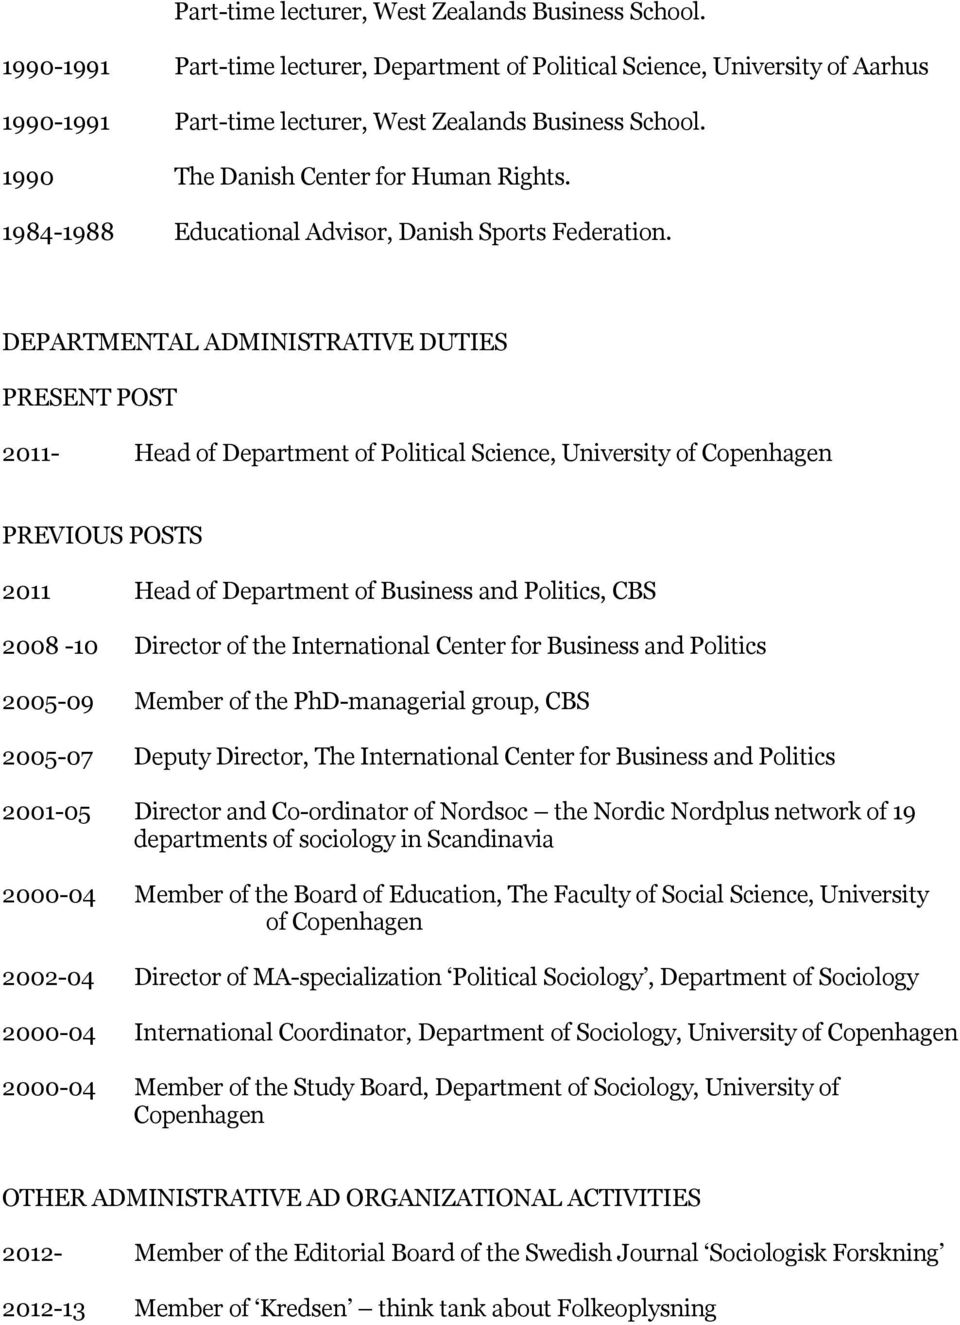 DEPARTMENTAL ADMINISTRATIVE DUTIES PRESENT POST 2011- Head of Department of Political Science, University of Copenhagen PREVIOUS POSTS 2011 Head of Department of Business and Politics, CBS 2008-10